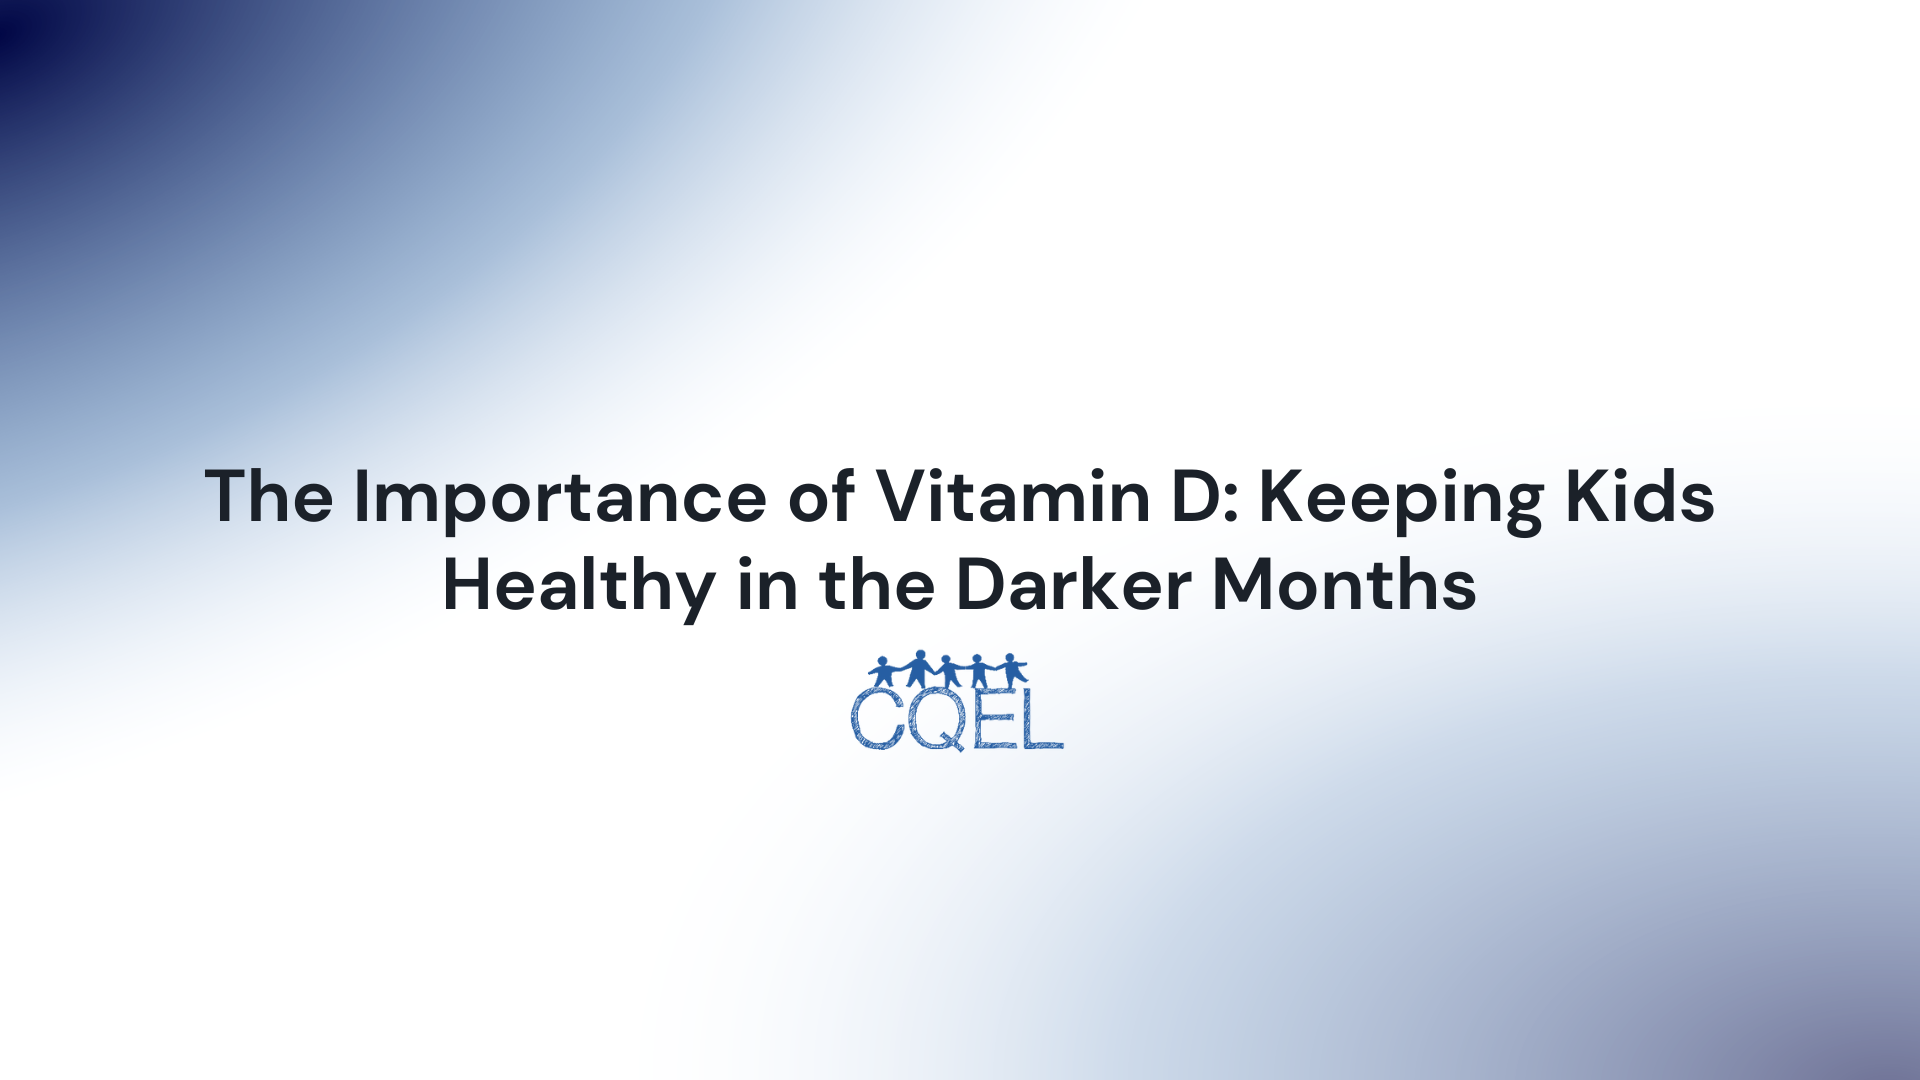 The Importance of Vitamin D: Keeping Kids Healthy in the Darker Months